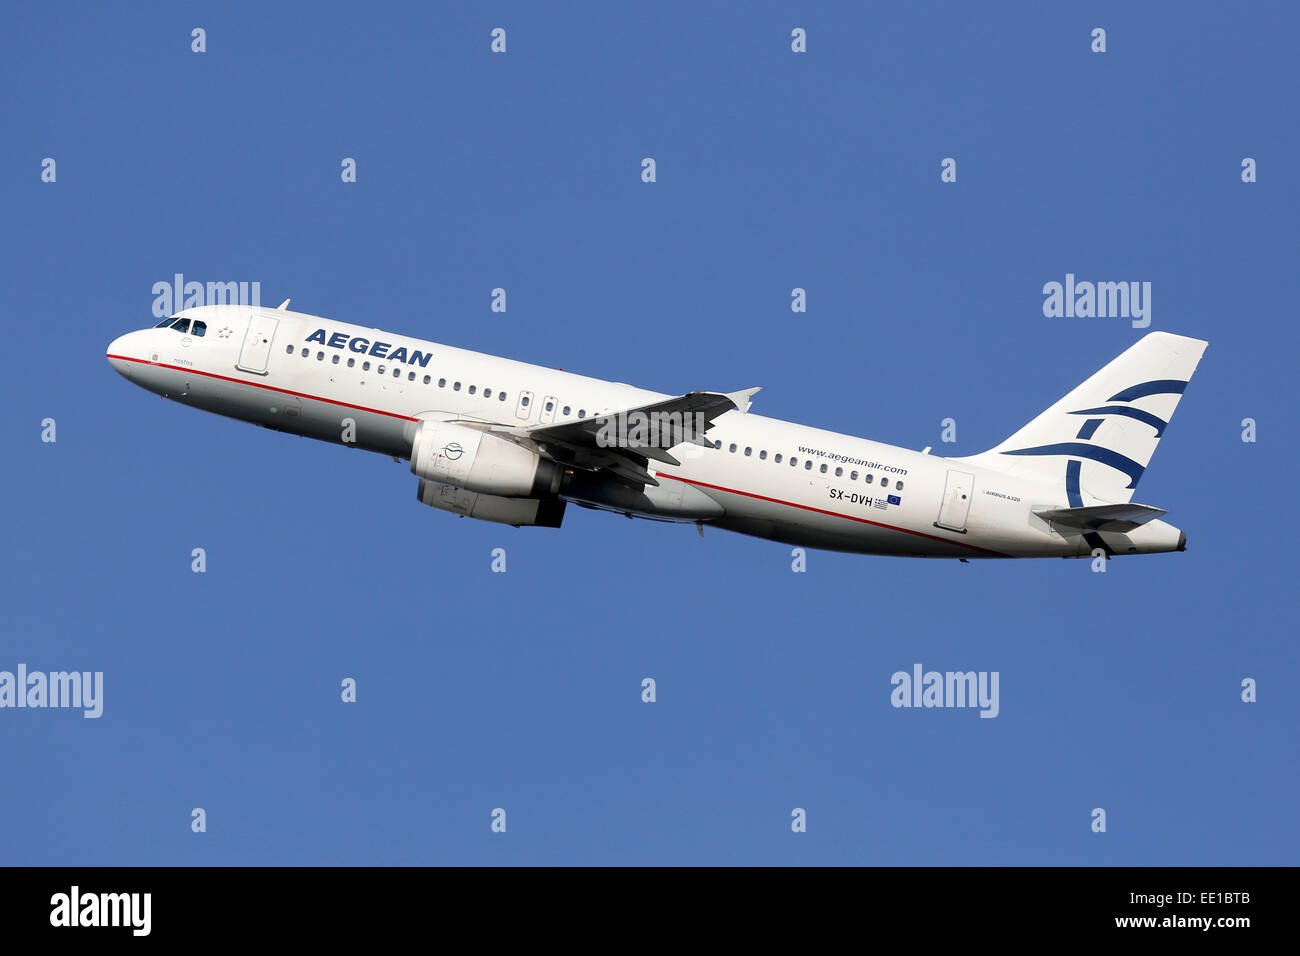 Barcelona, Spain - December 12, 2014: An Aegean Airlines Airbus A320 aircraft with the registration SX-DVH taking off from Barce Stock Photo